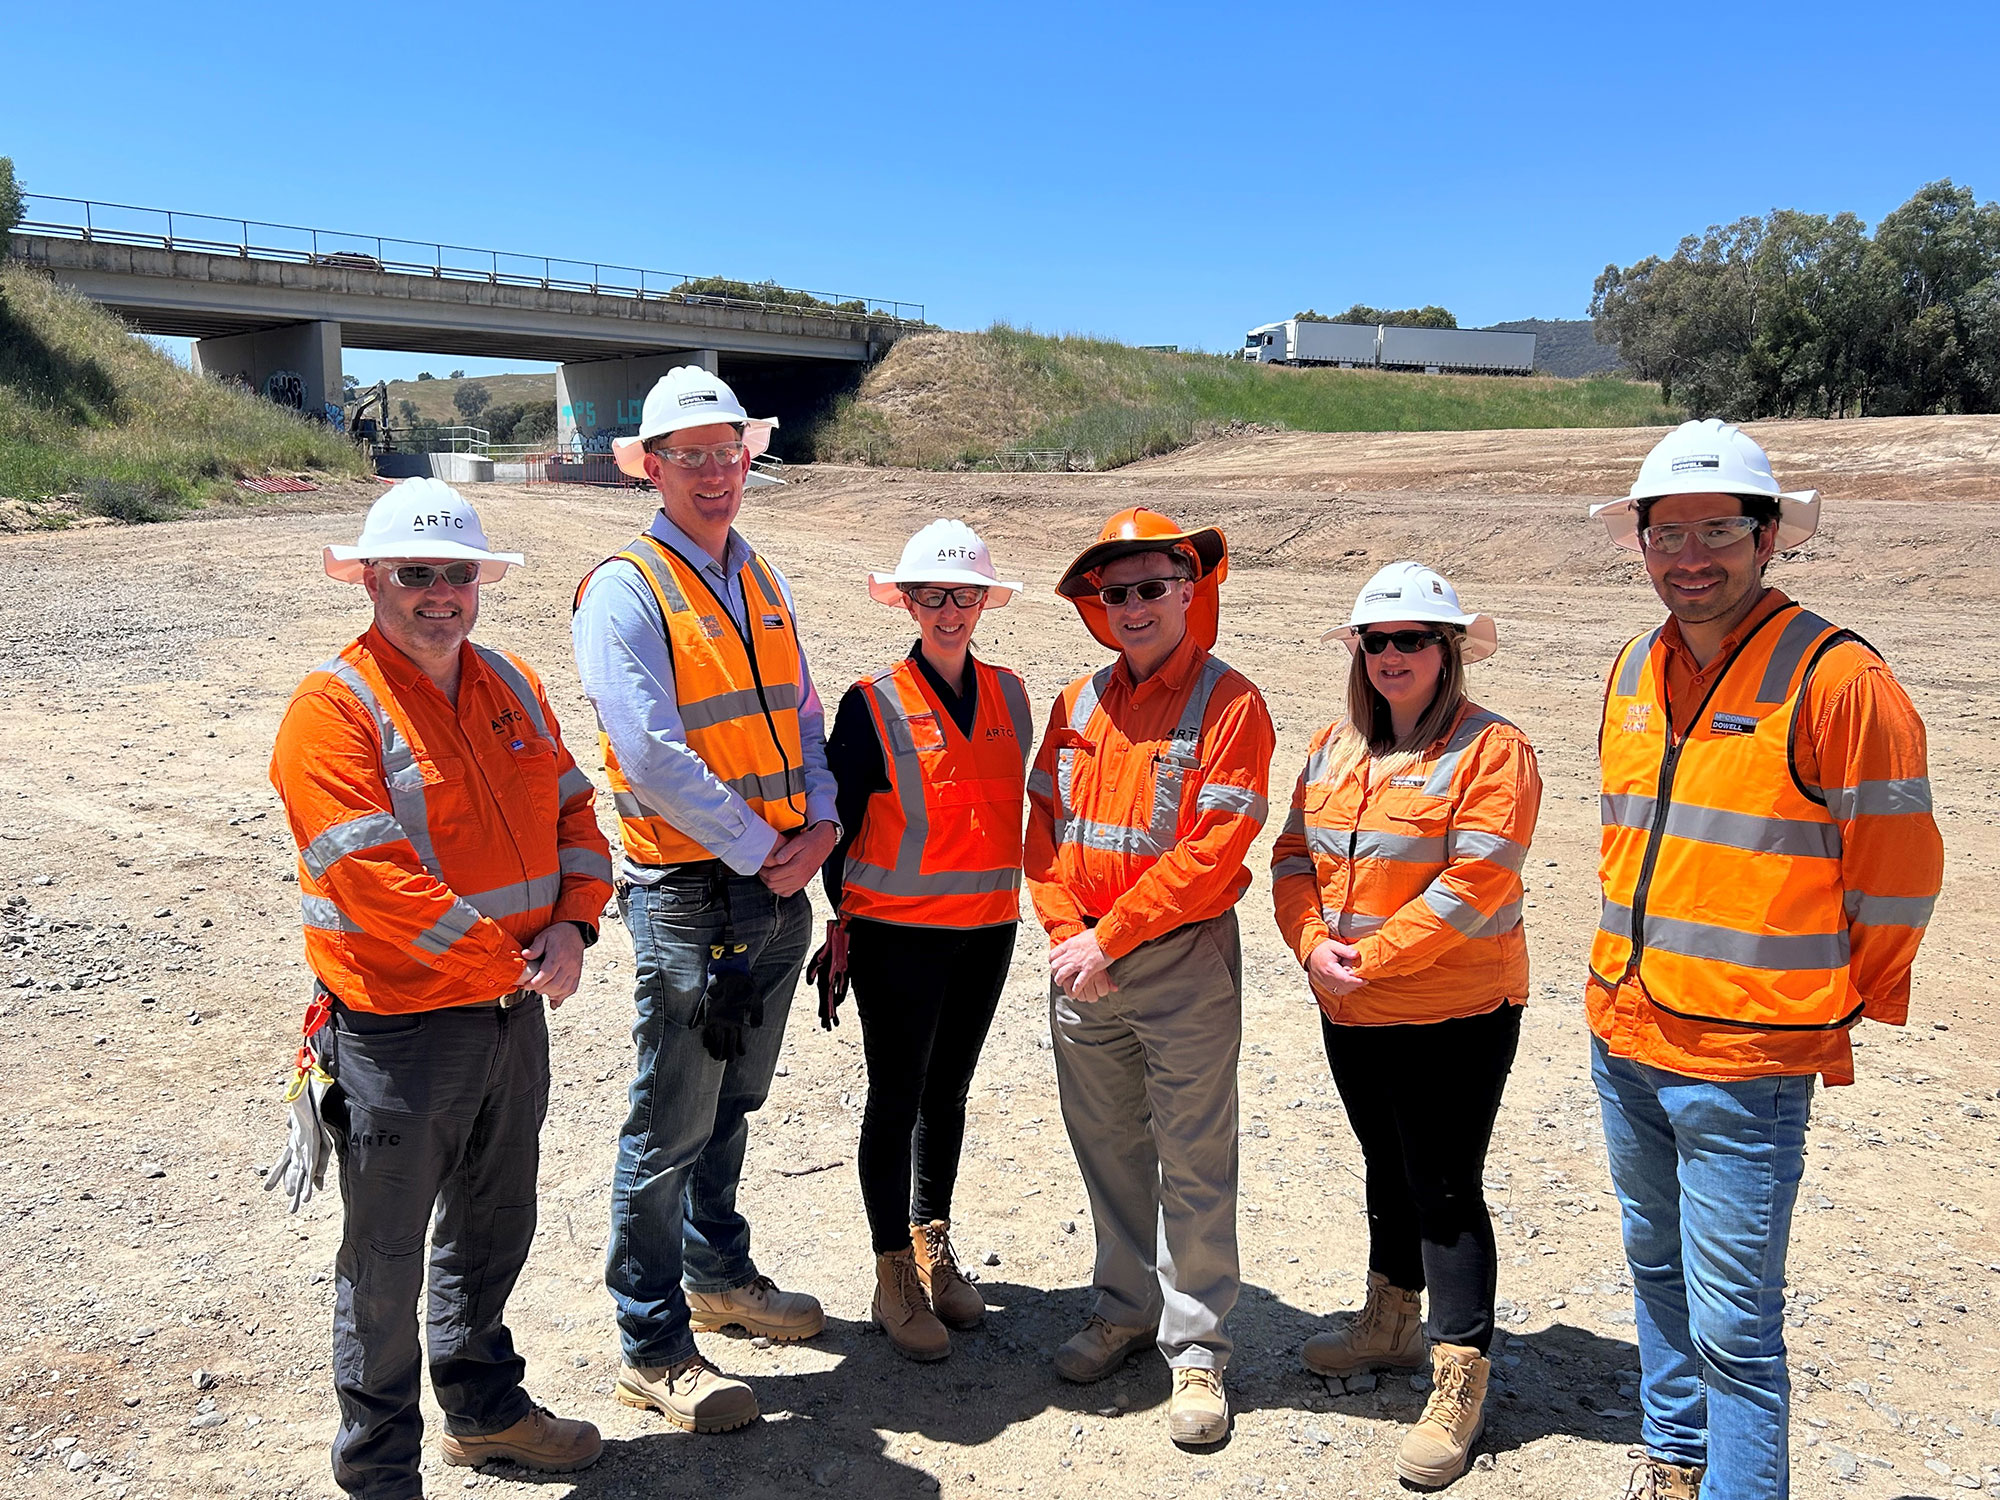 The ARTC and McConnell Dowell teams inspect the new lowered track at Murray Valley Highway, Barnawartha North